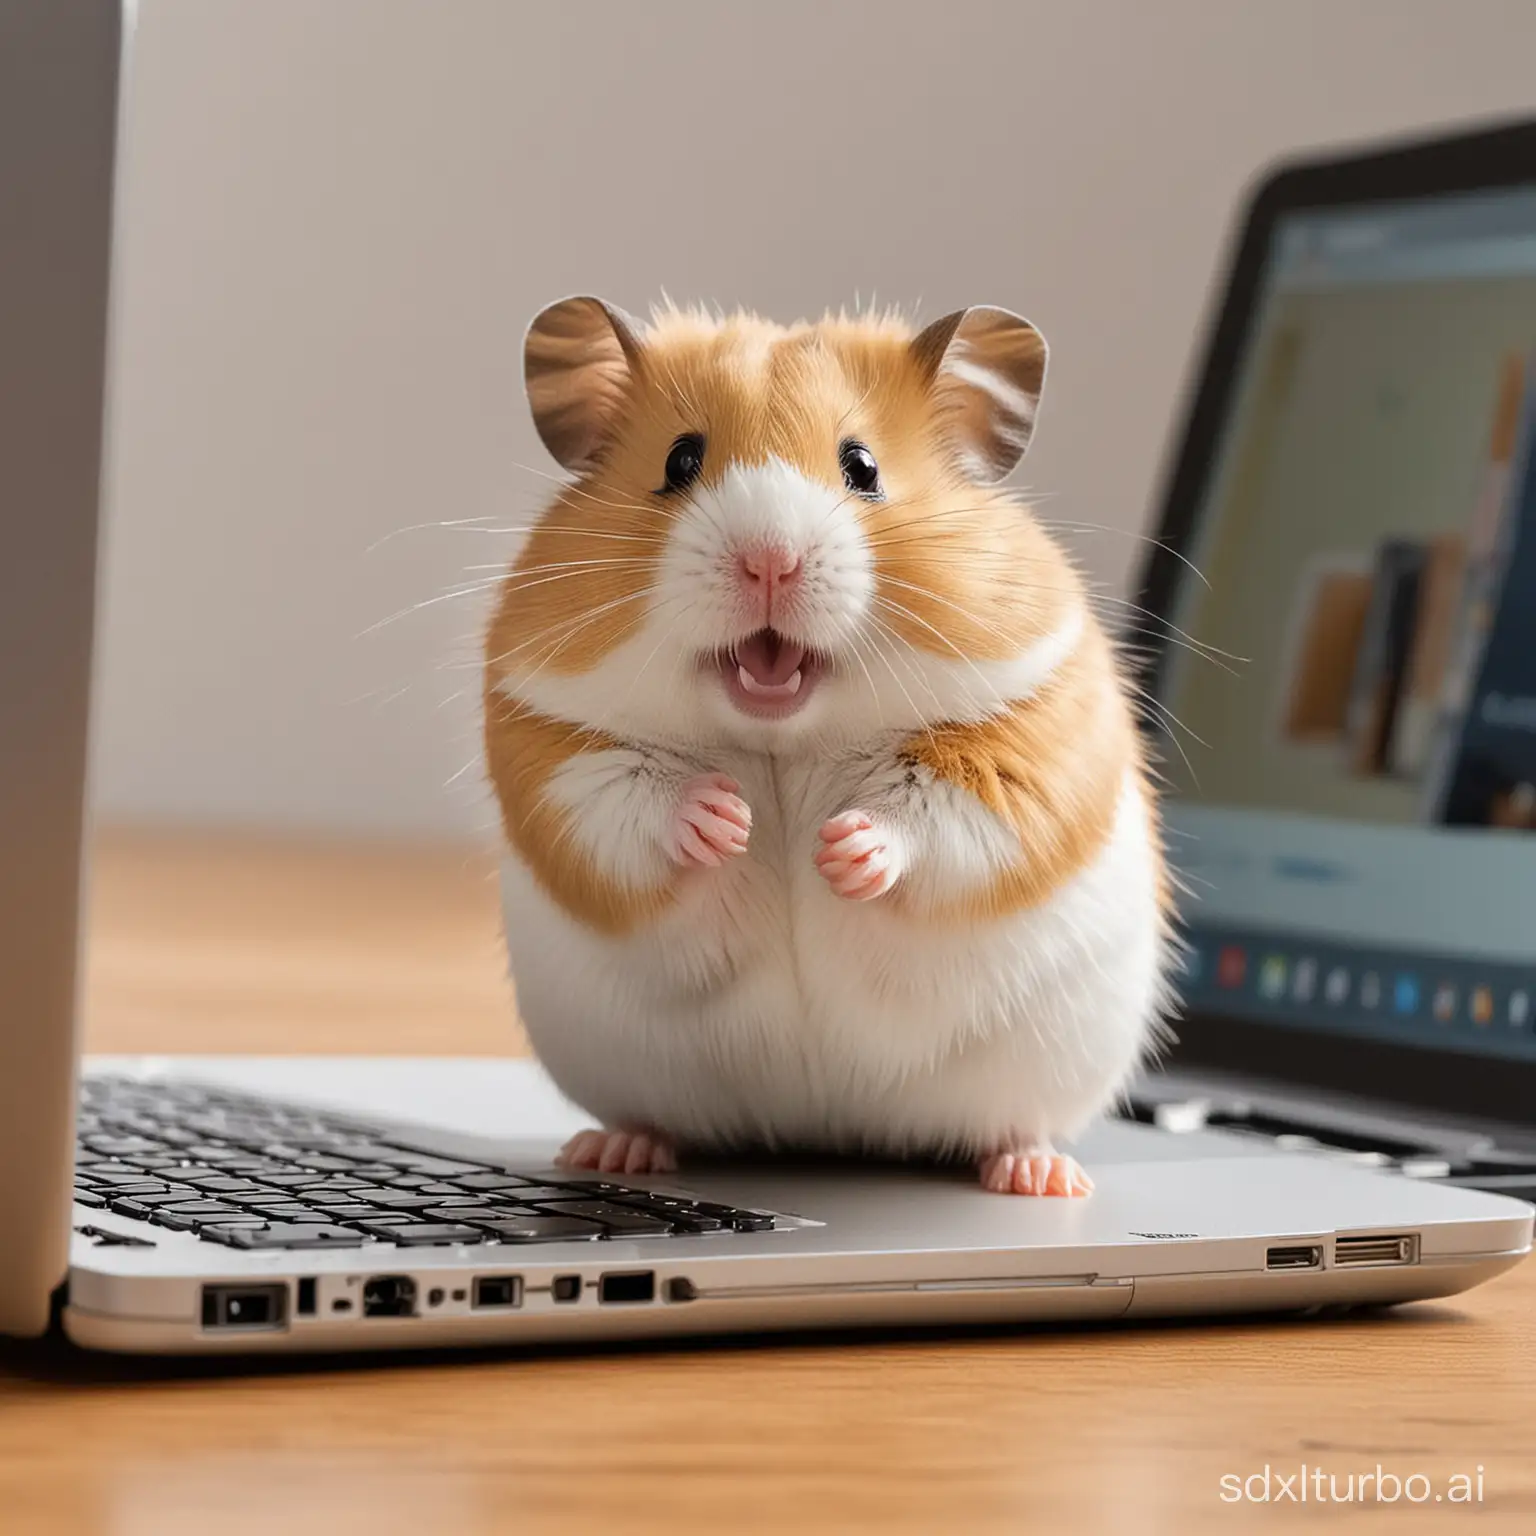 Happy-Hamster-Achieving-WorkLife-Balance-with-Laptop